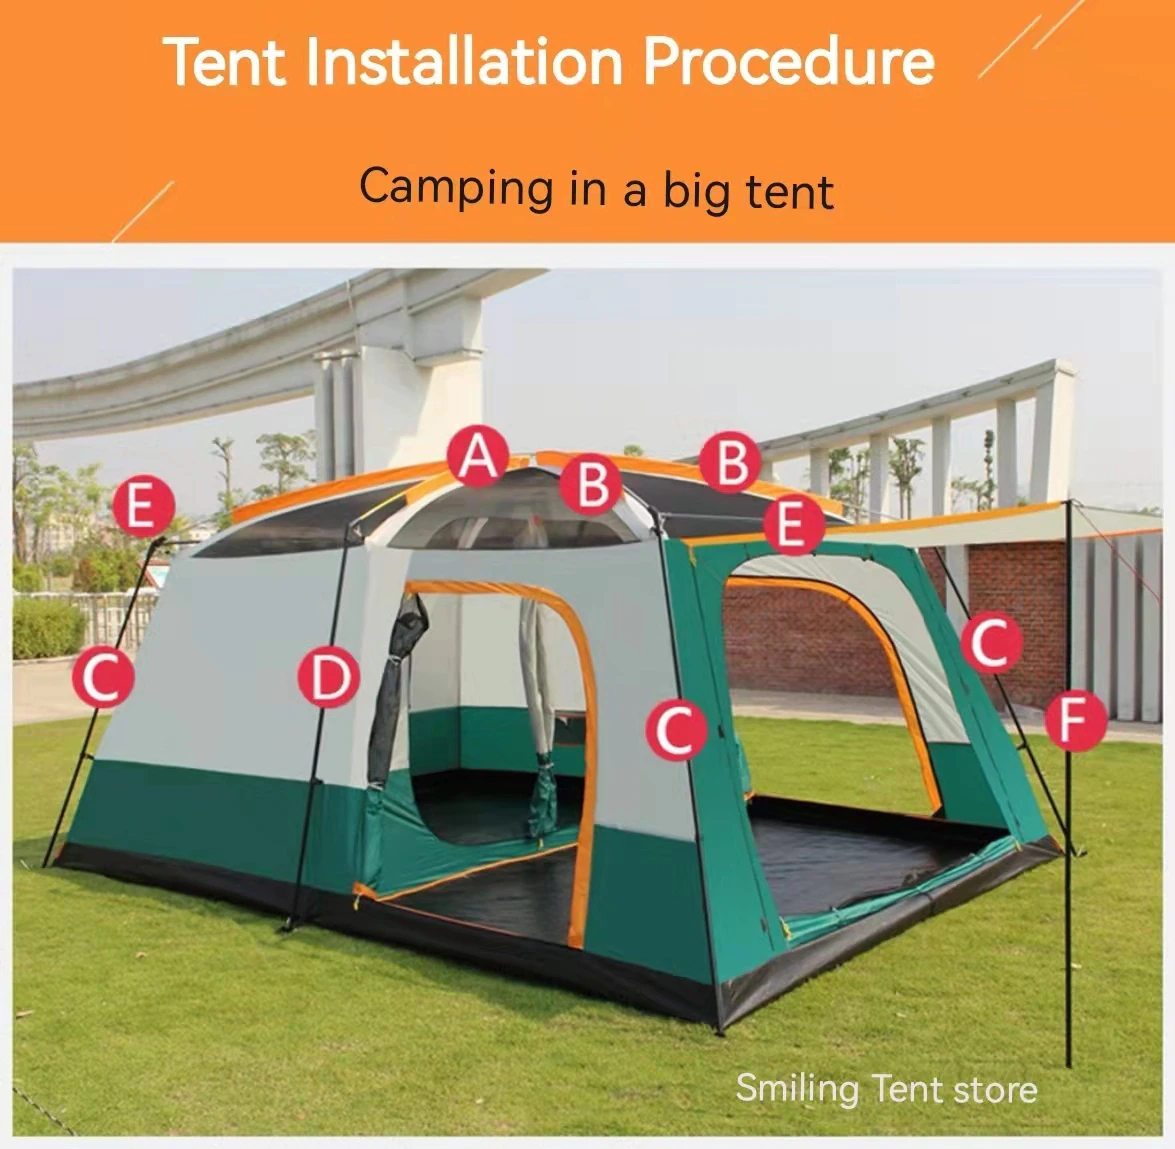 Cheap Goat Tents Outdoor Camping With 2 Bedrooms And 1 Living Room Big Tent 8